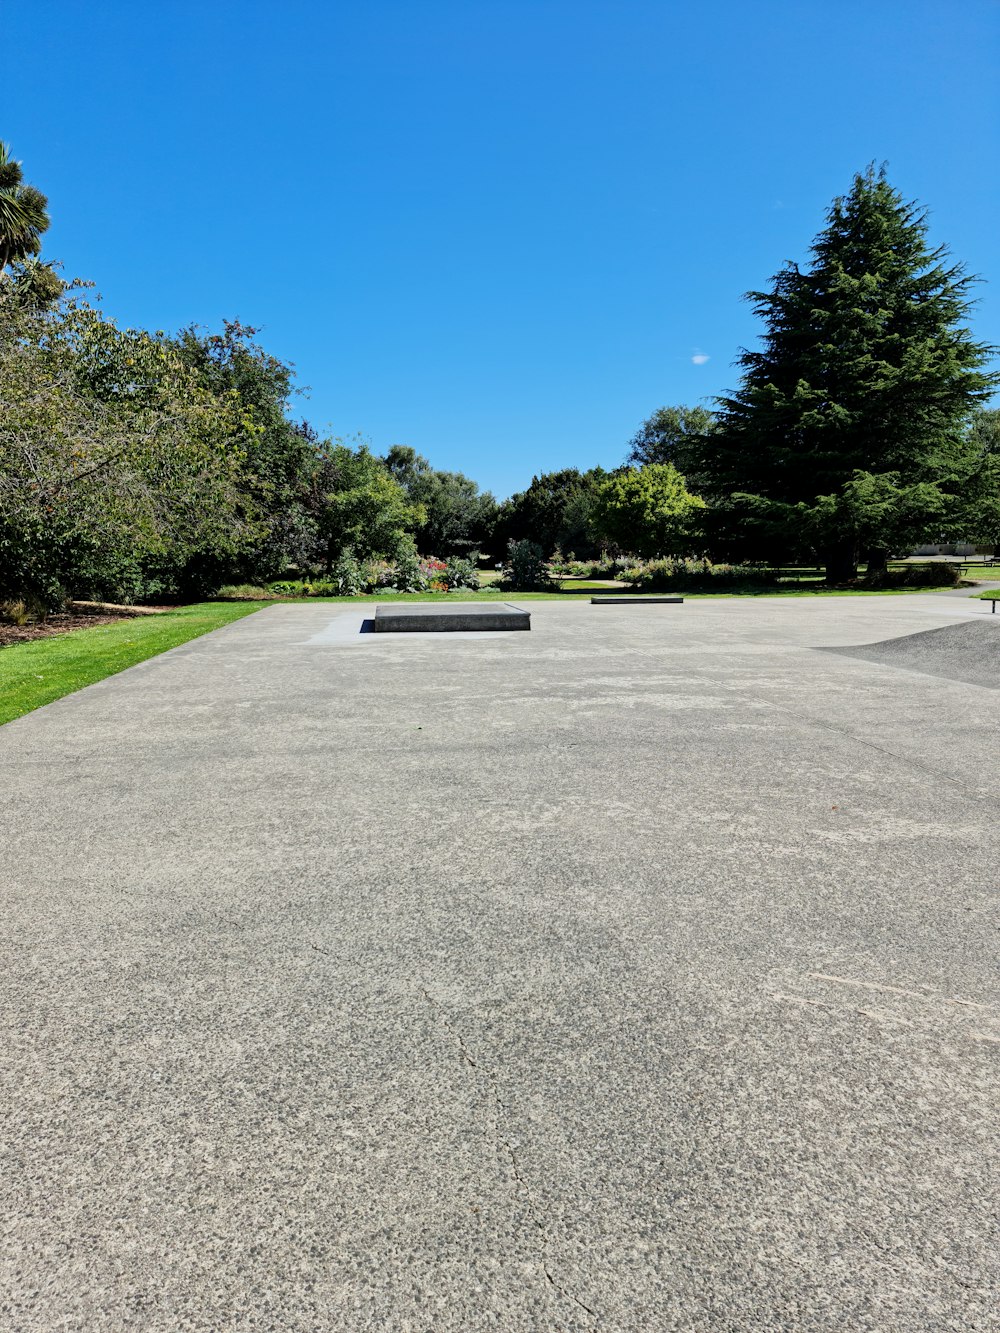 a concrete parking lot with a bench in the middle of it